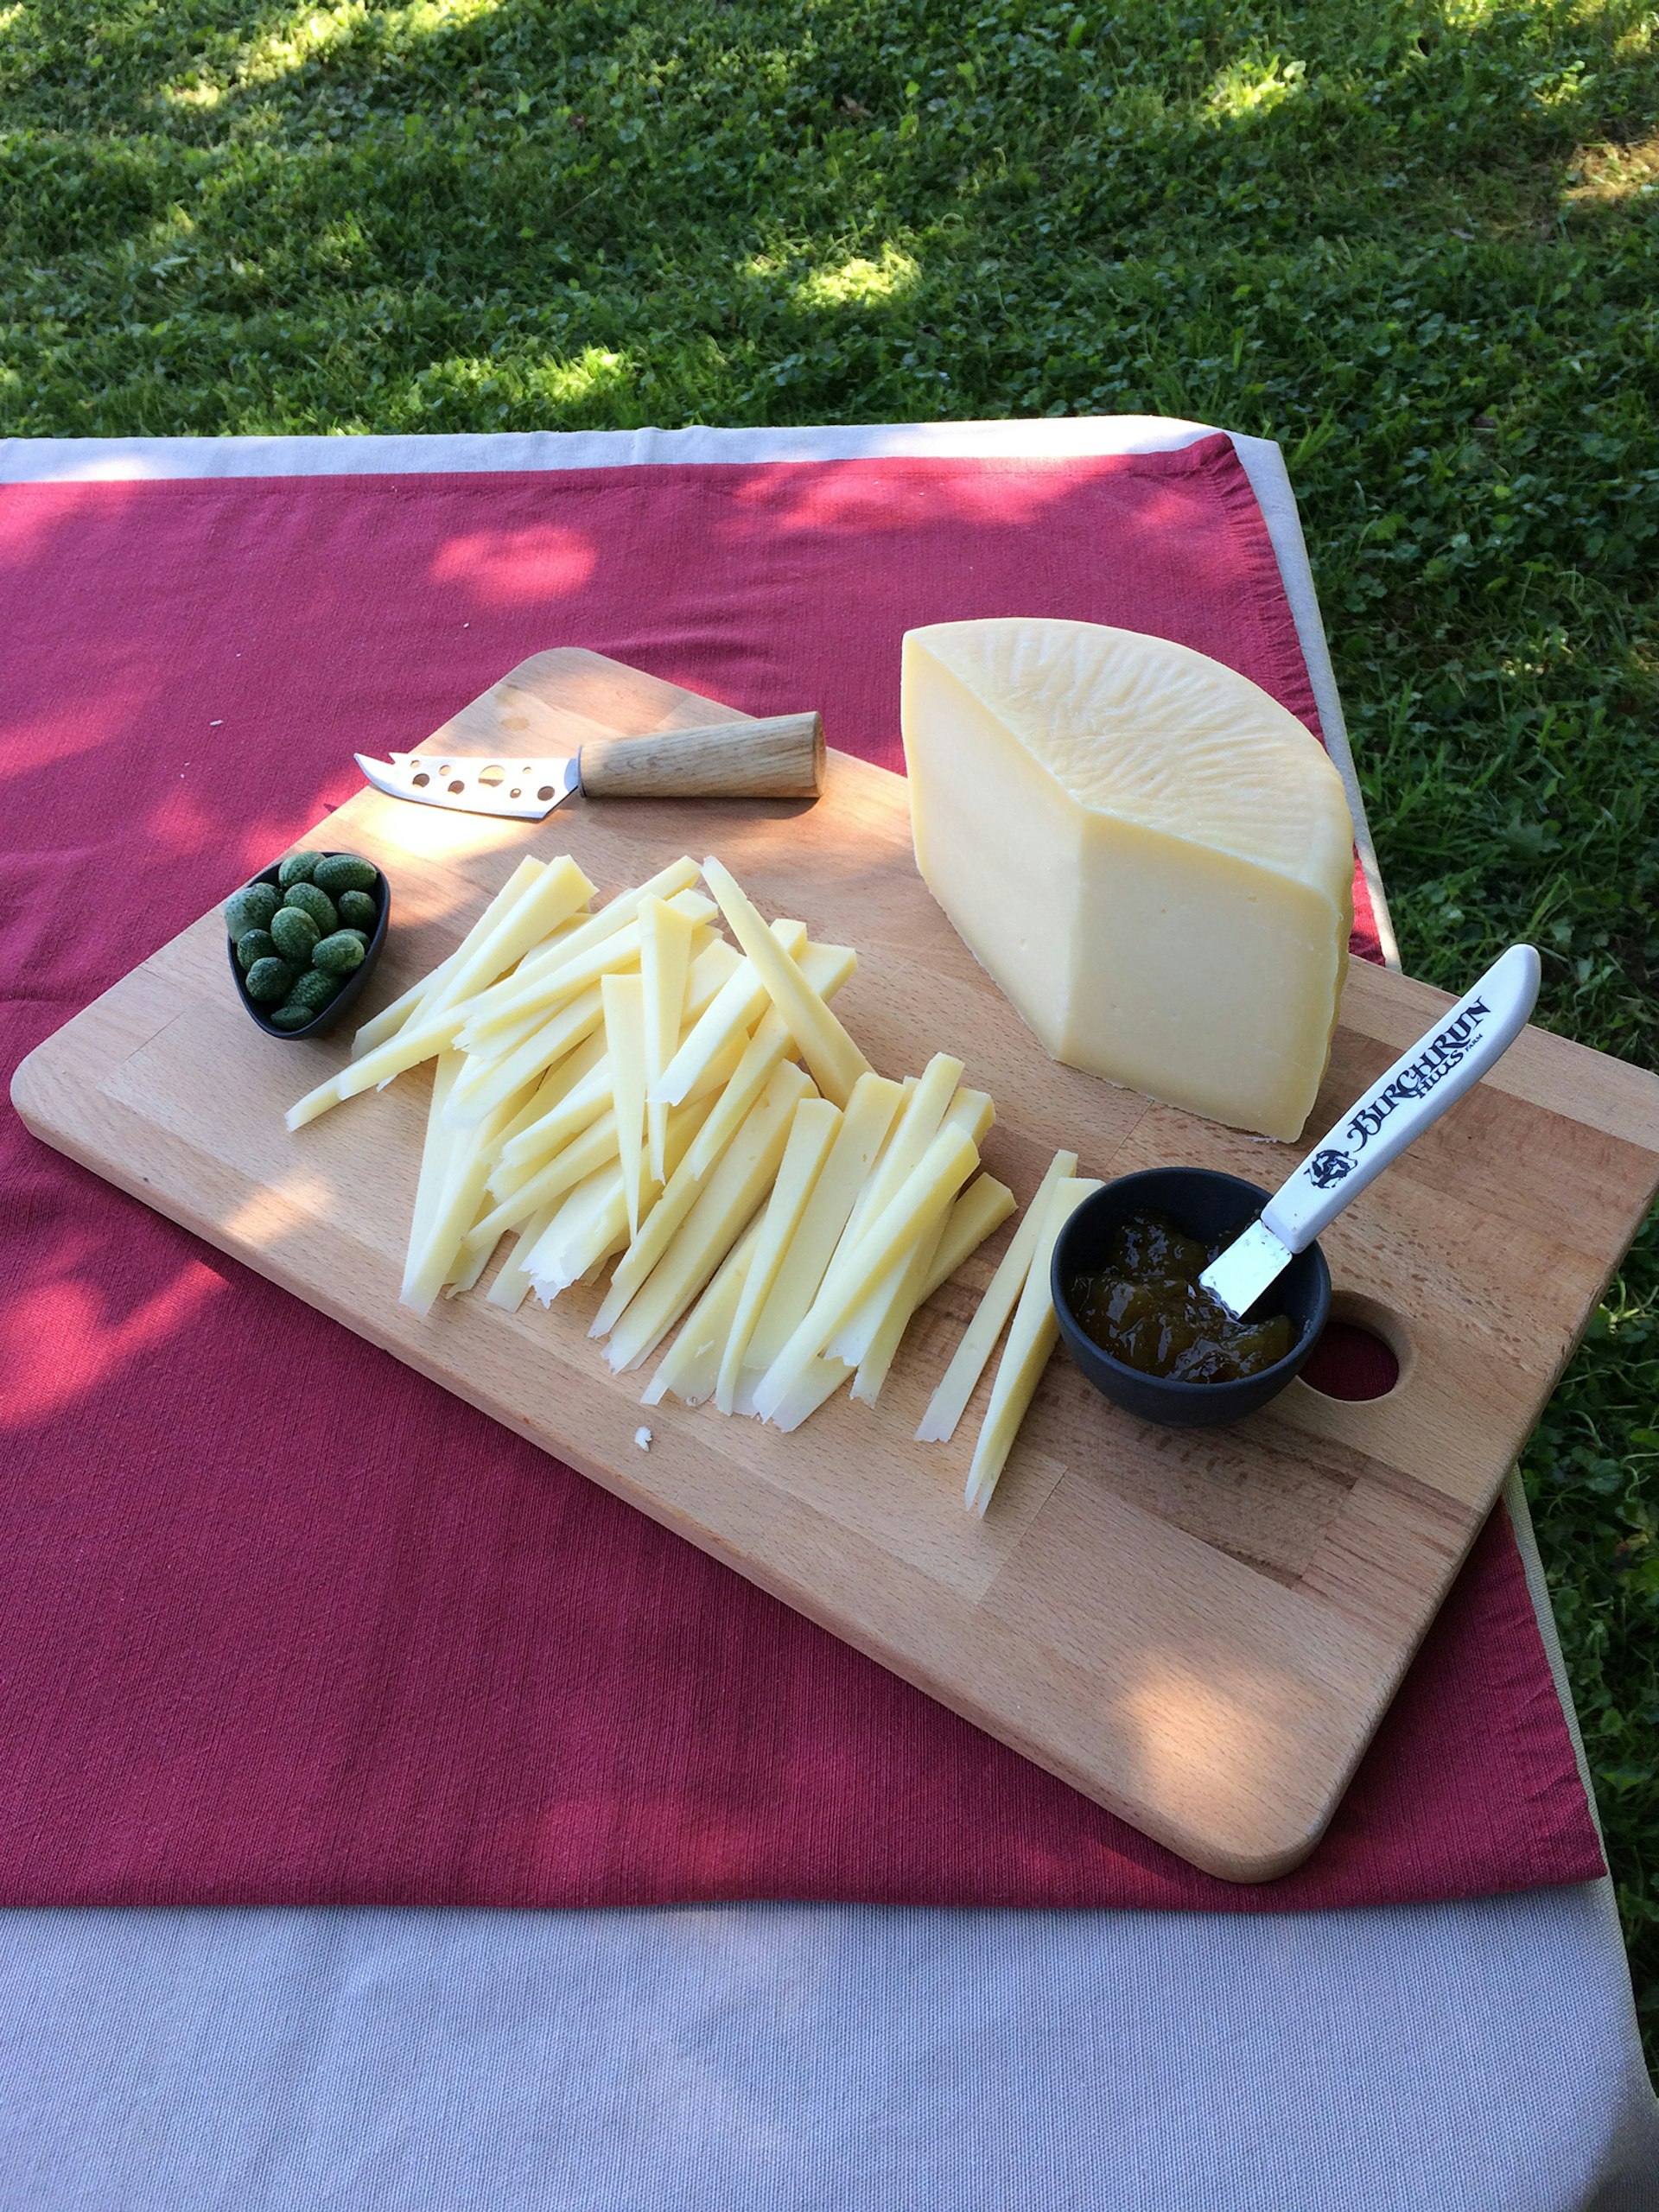 An inviting cheese plate sits on a picnic table on a sunny summer day